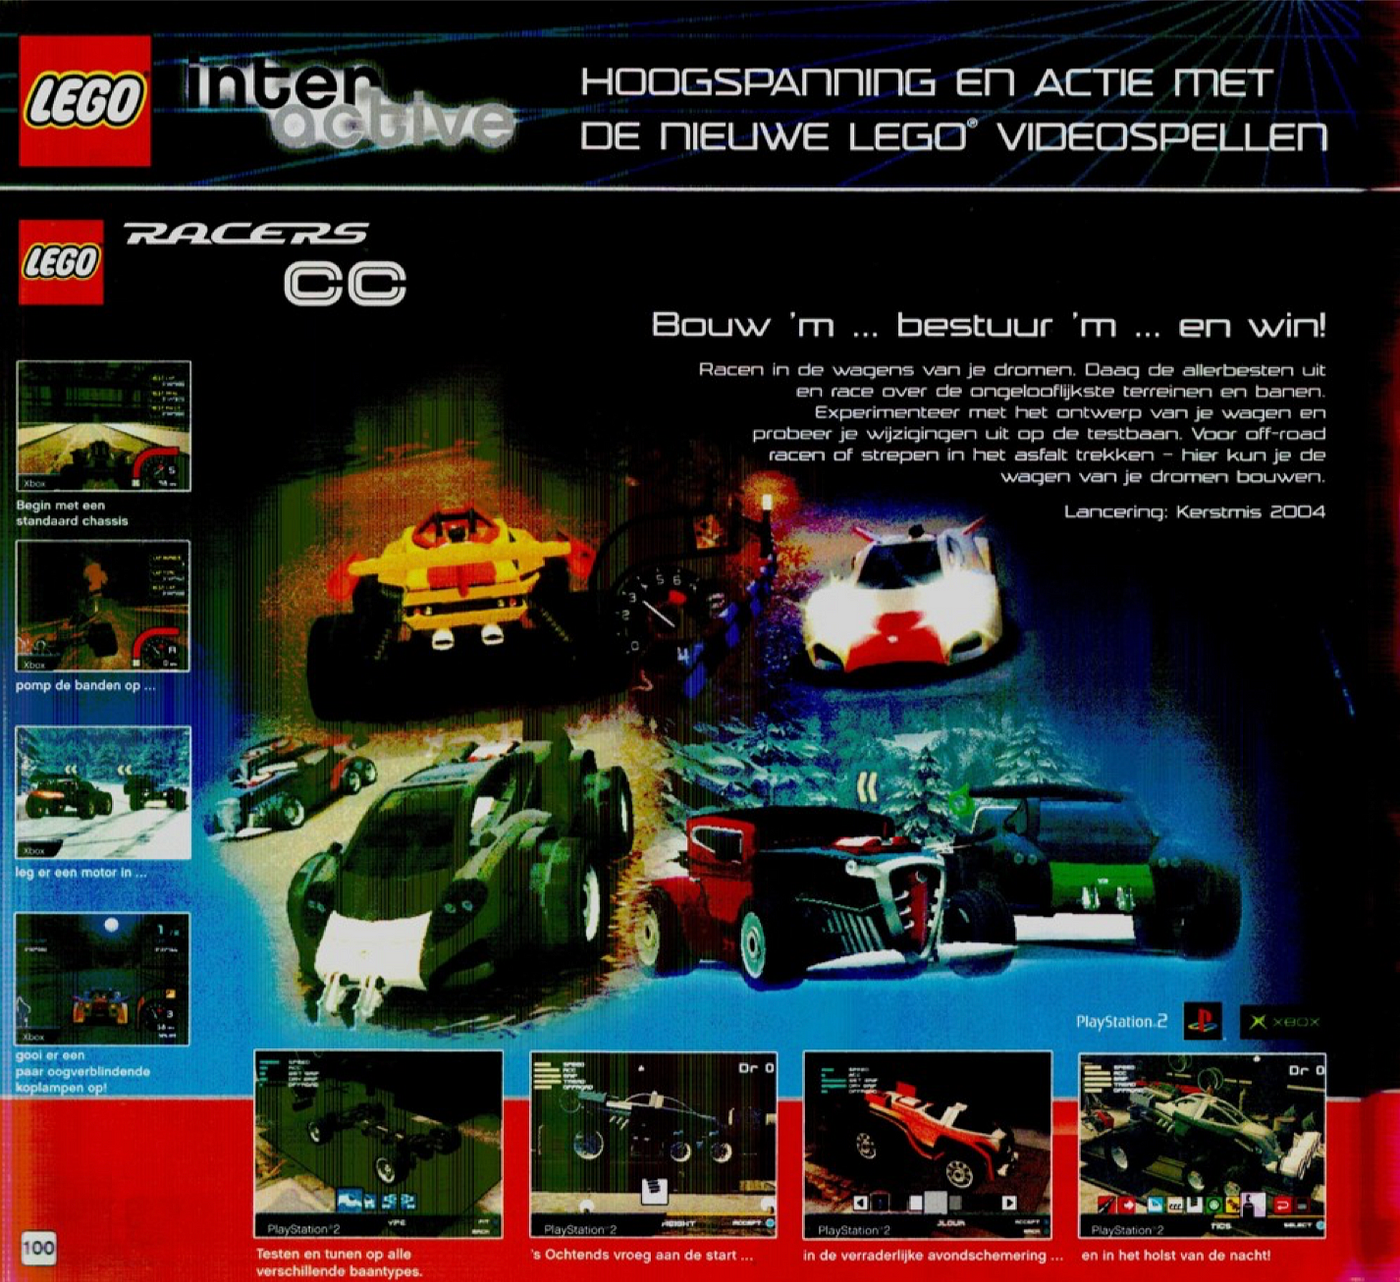 More of) The Secret History of LEGO Racers 3 | by Jake Theriault |  SubpixelFilms.com | Medium